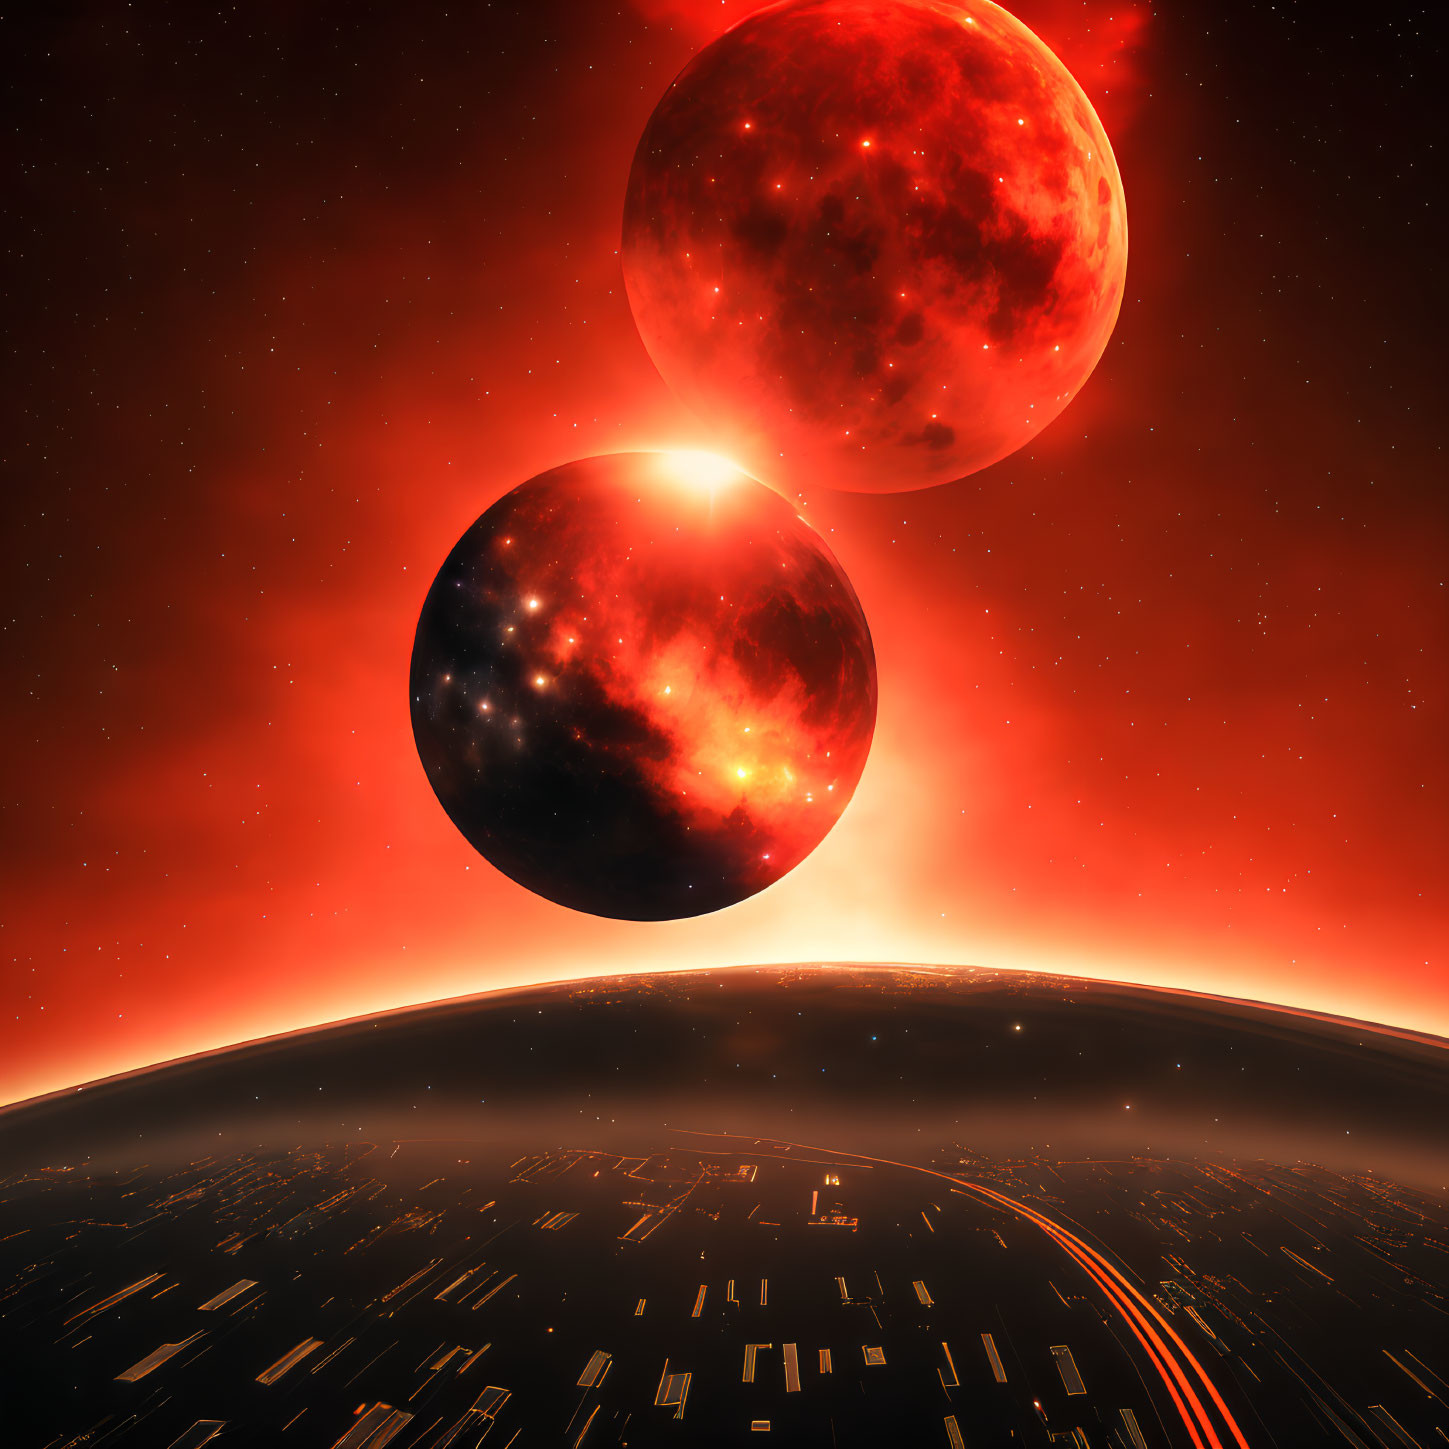 Two large celestial bodies near planet under red sky